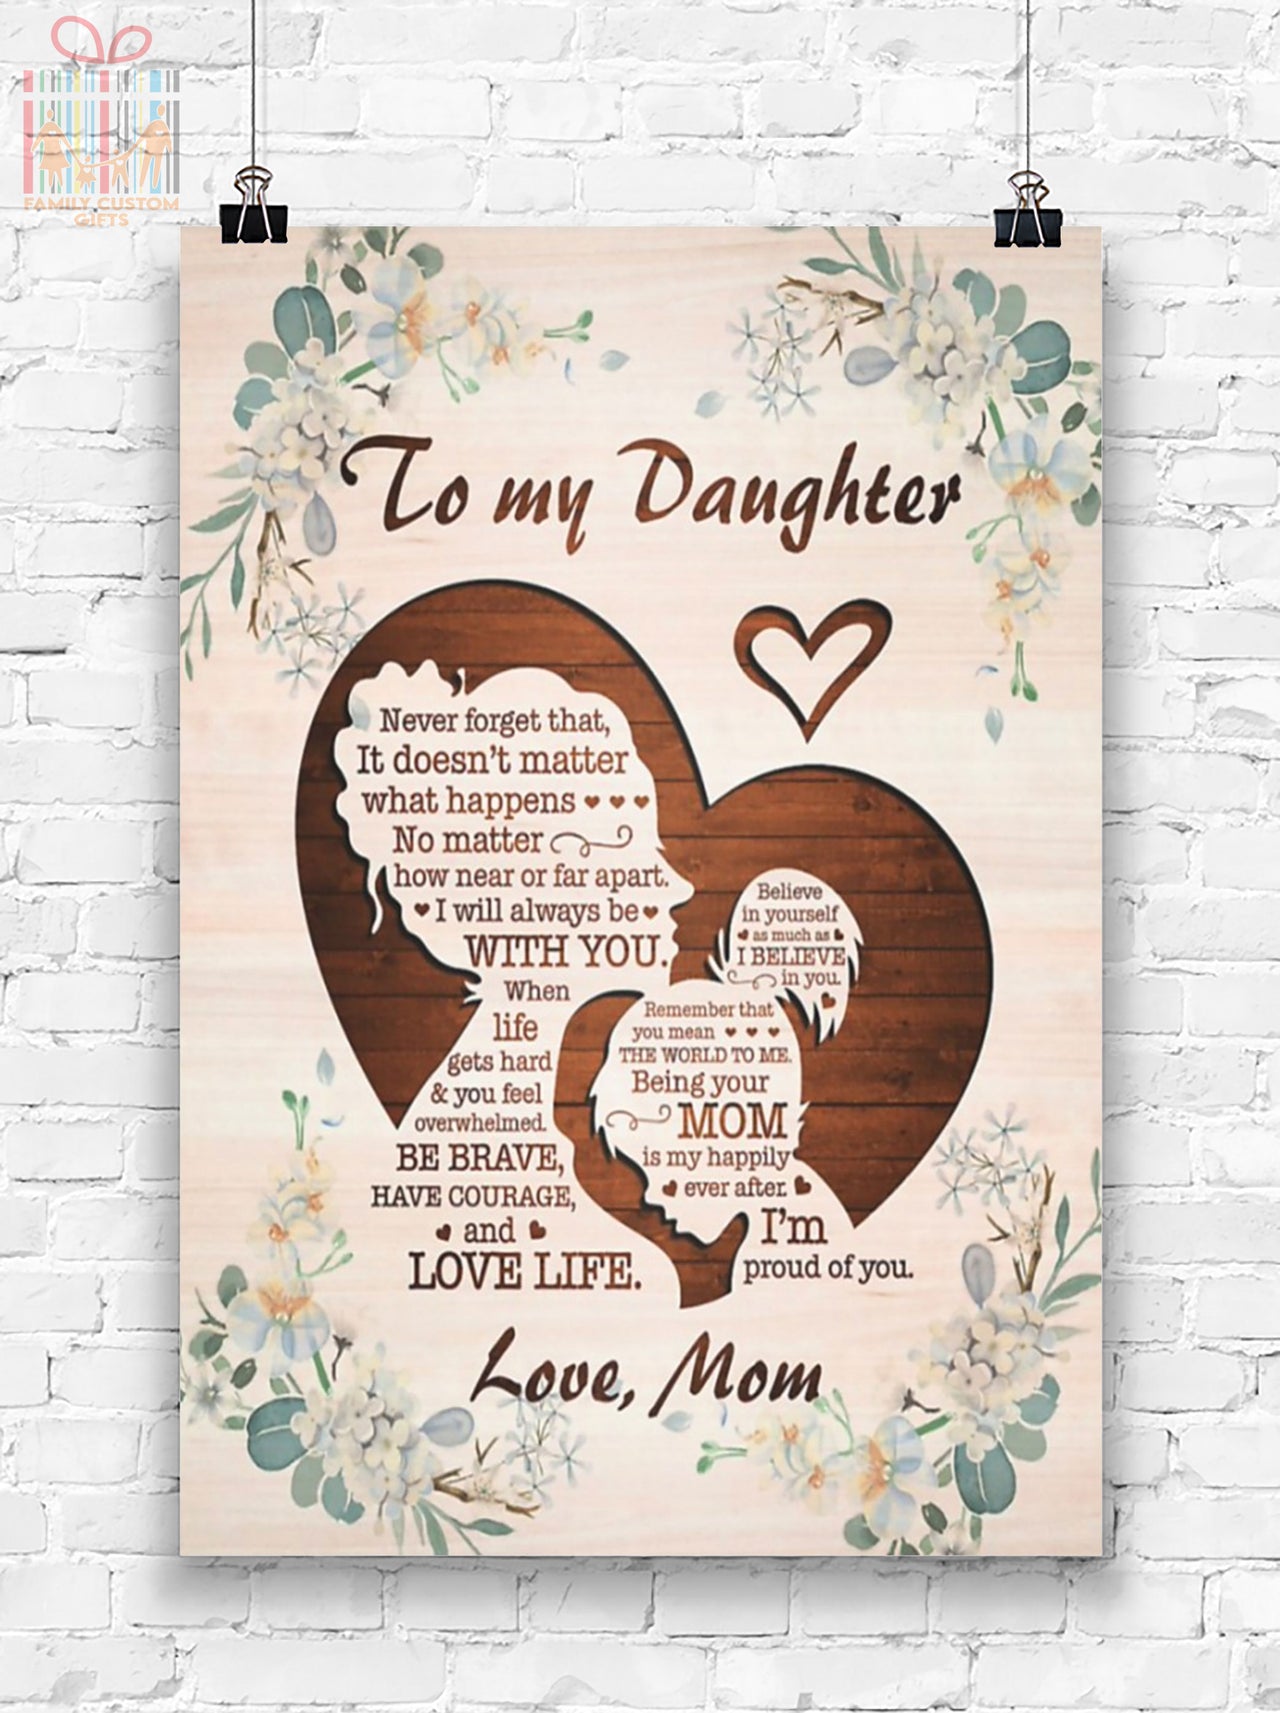 Custom Poster Prints To My Daughter from Mom Personalized Wall Art for Daughter - Premium Poster